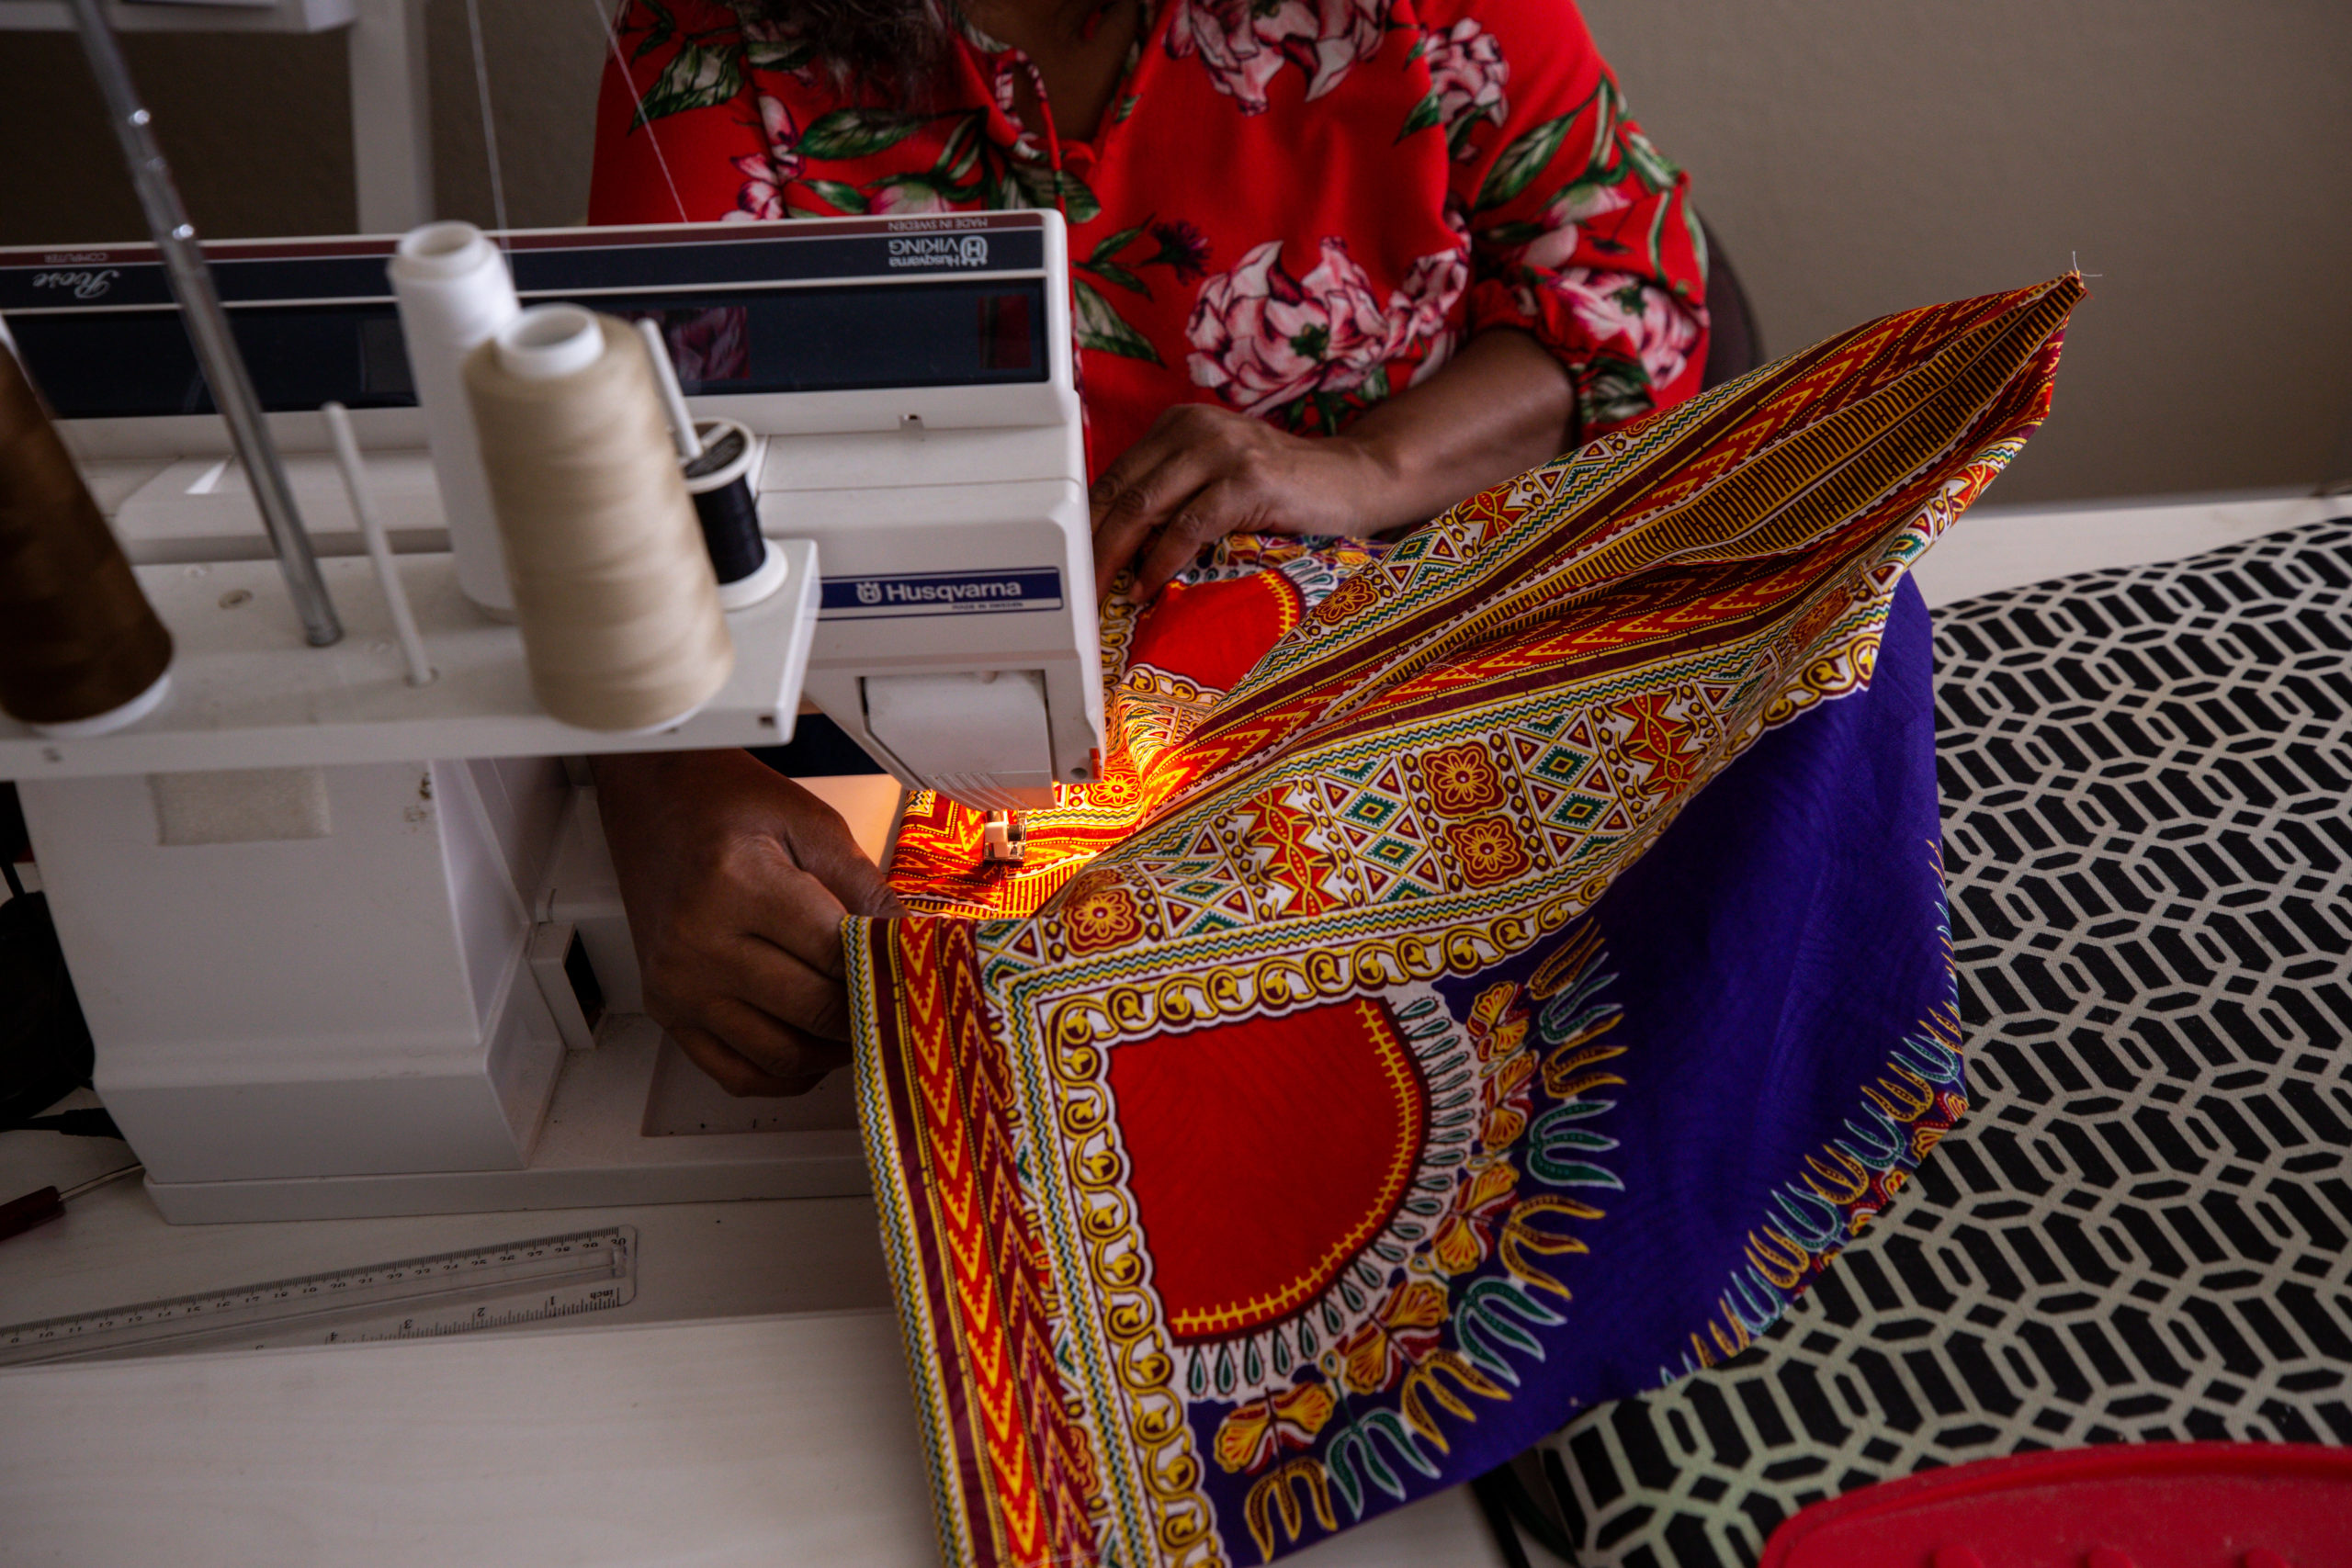 A Black woman, seen as her torso and hands working on a sewing machine, with colorful red and gold fabric being fed through.